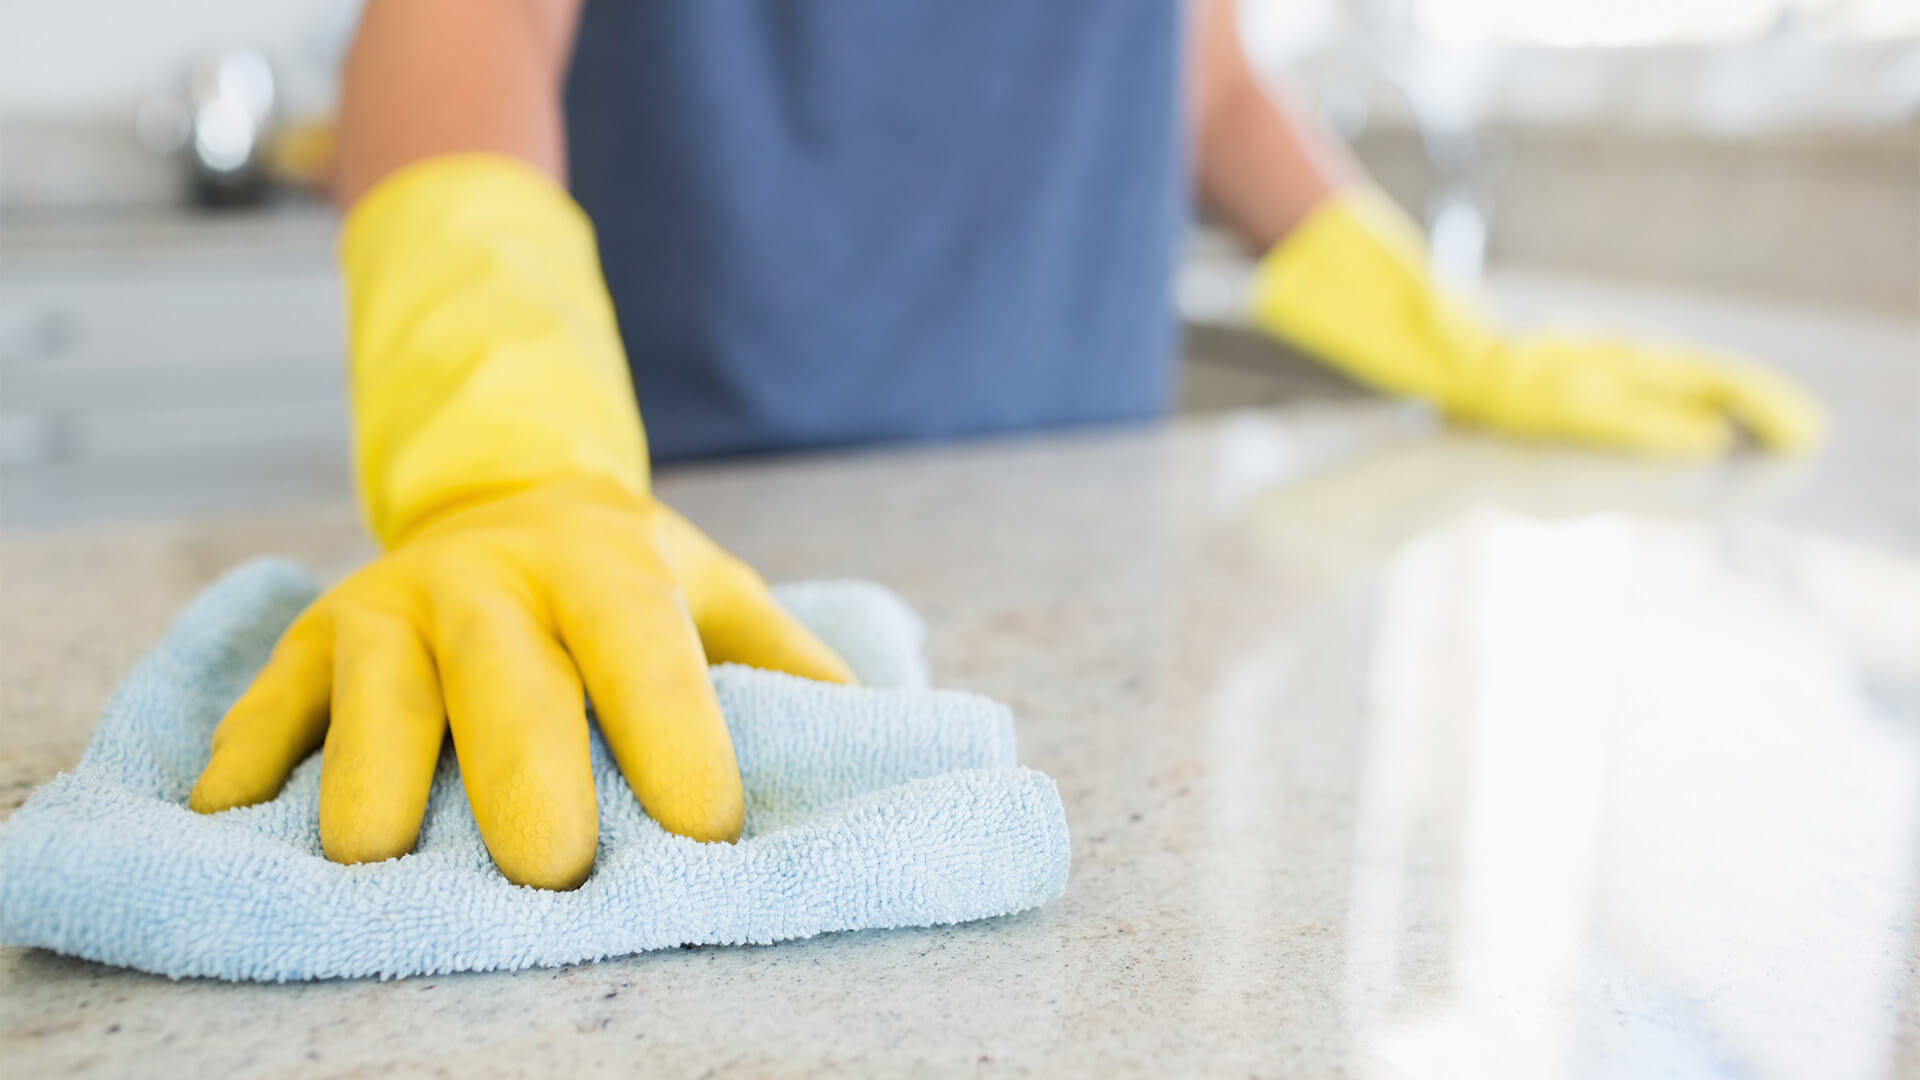 Closeup of person wearing rubber gloves cleaning a kitchen surface